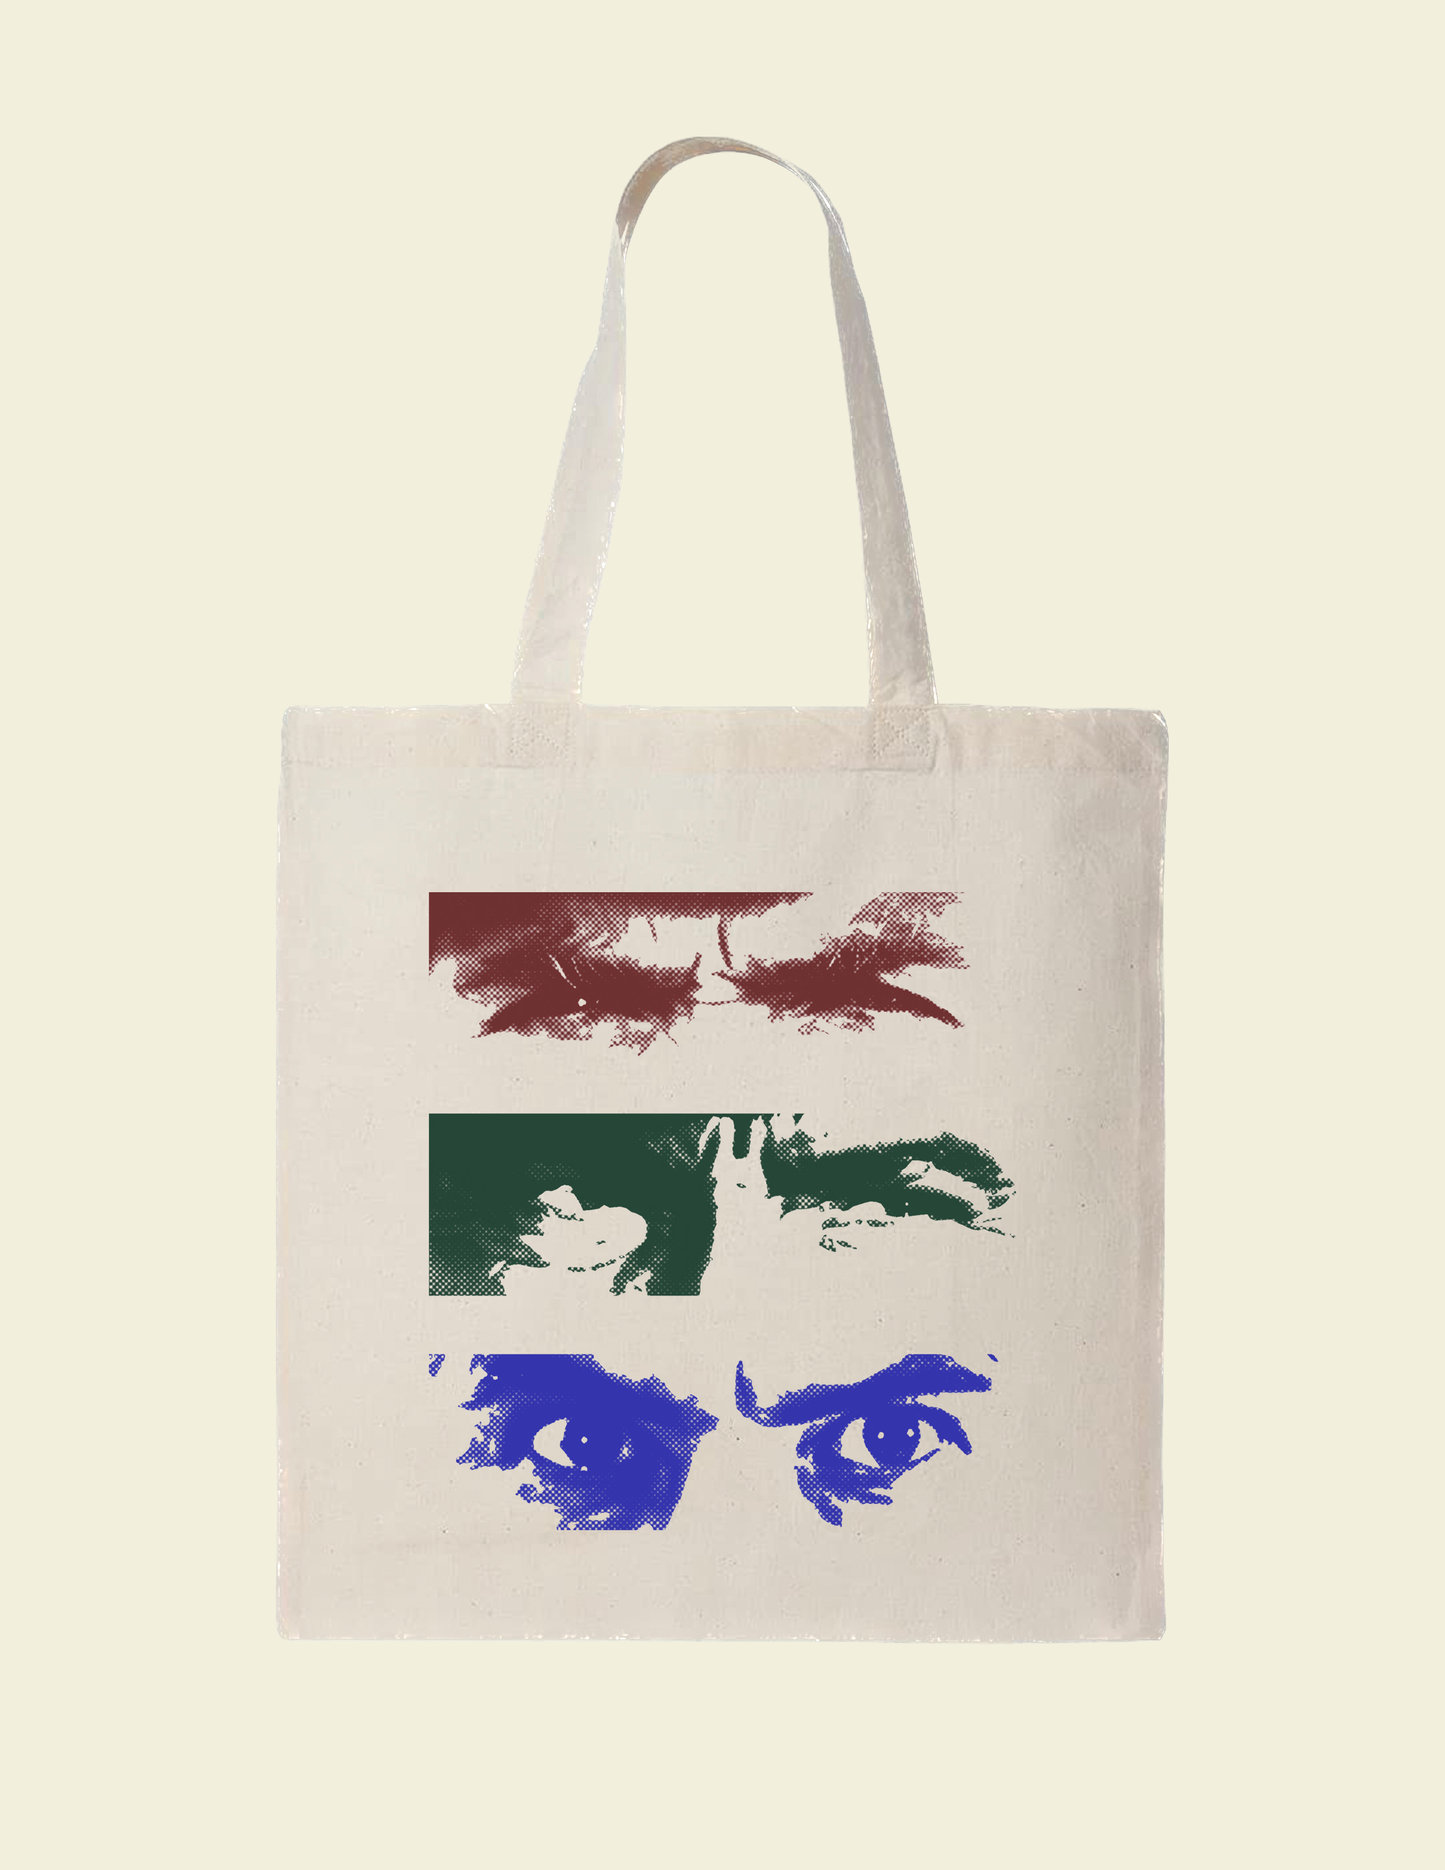 The Good, The Bad and the Ugly Tote